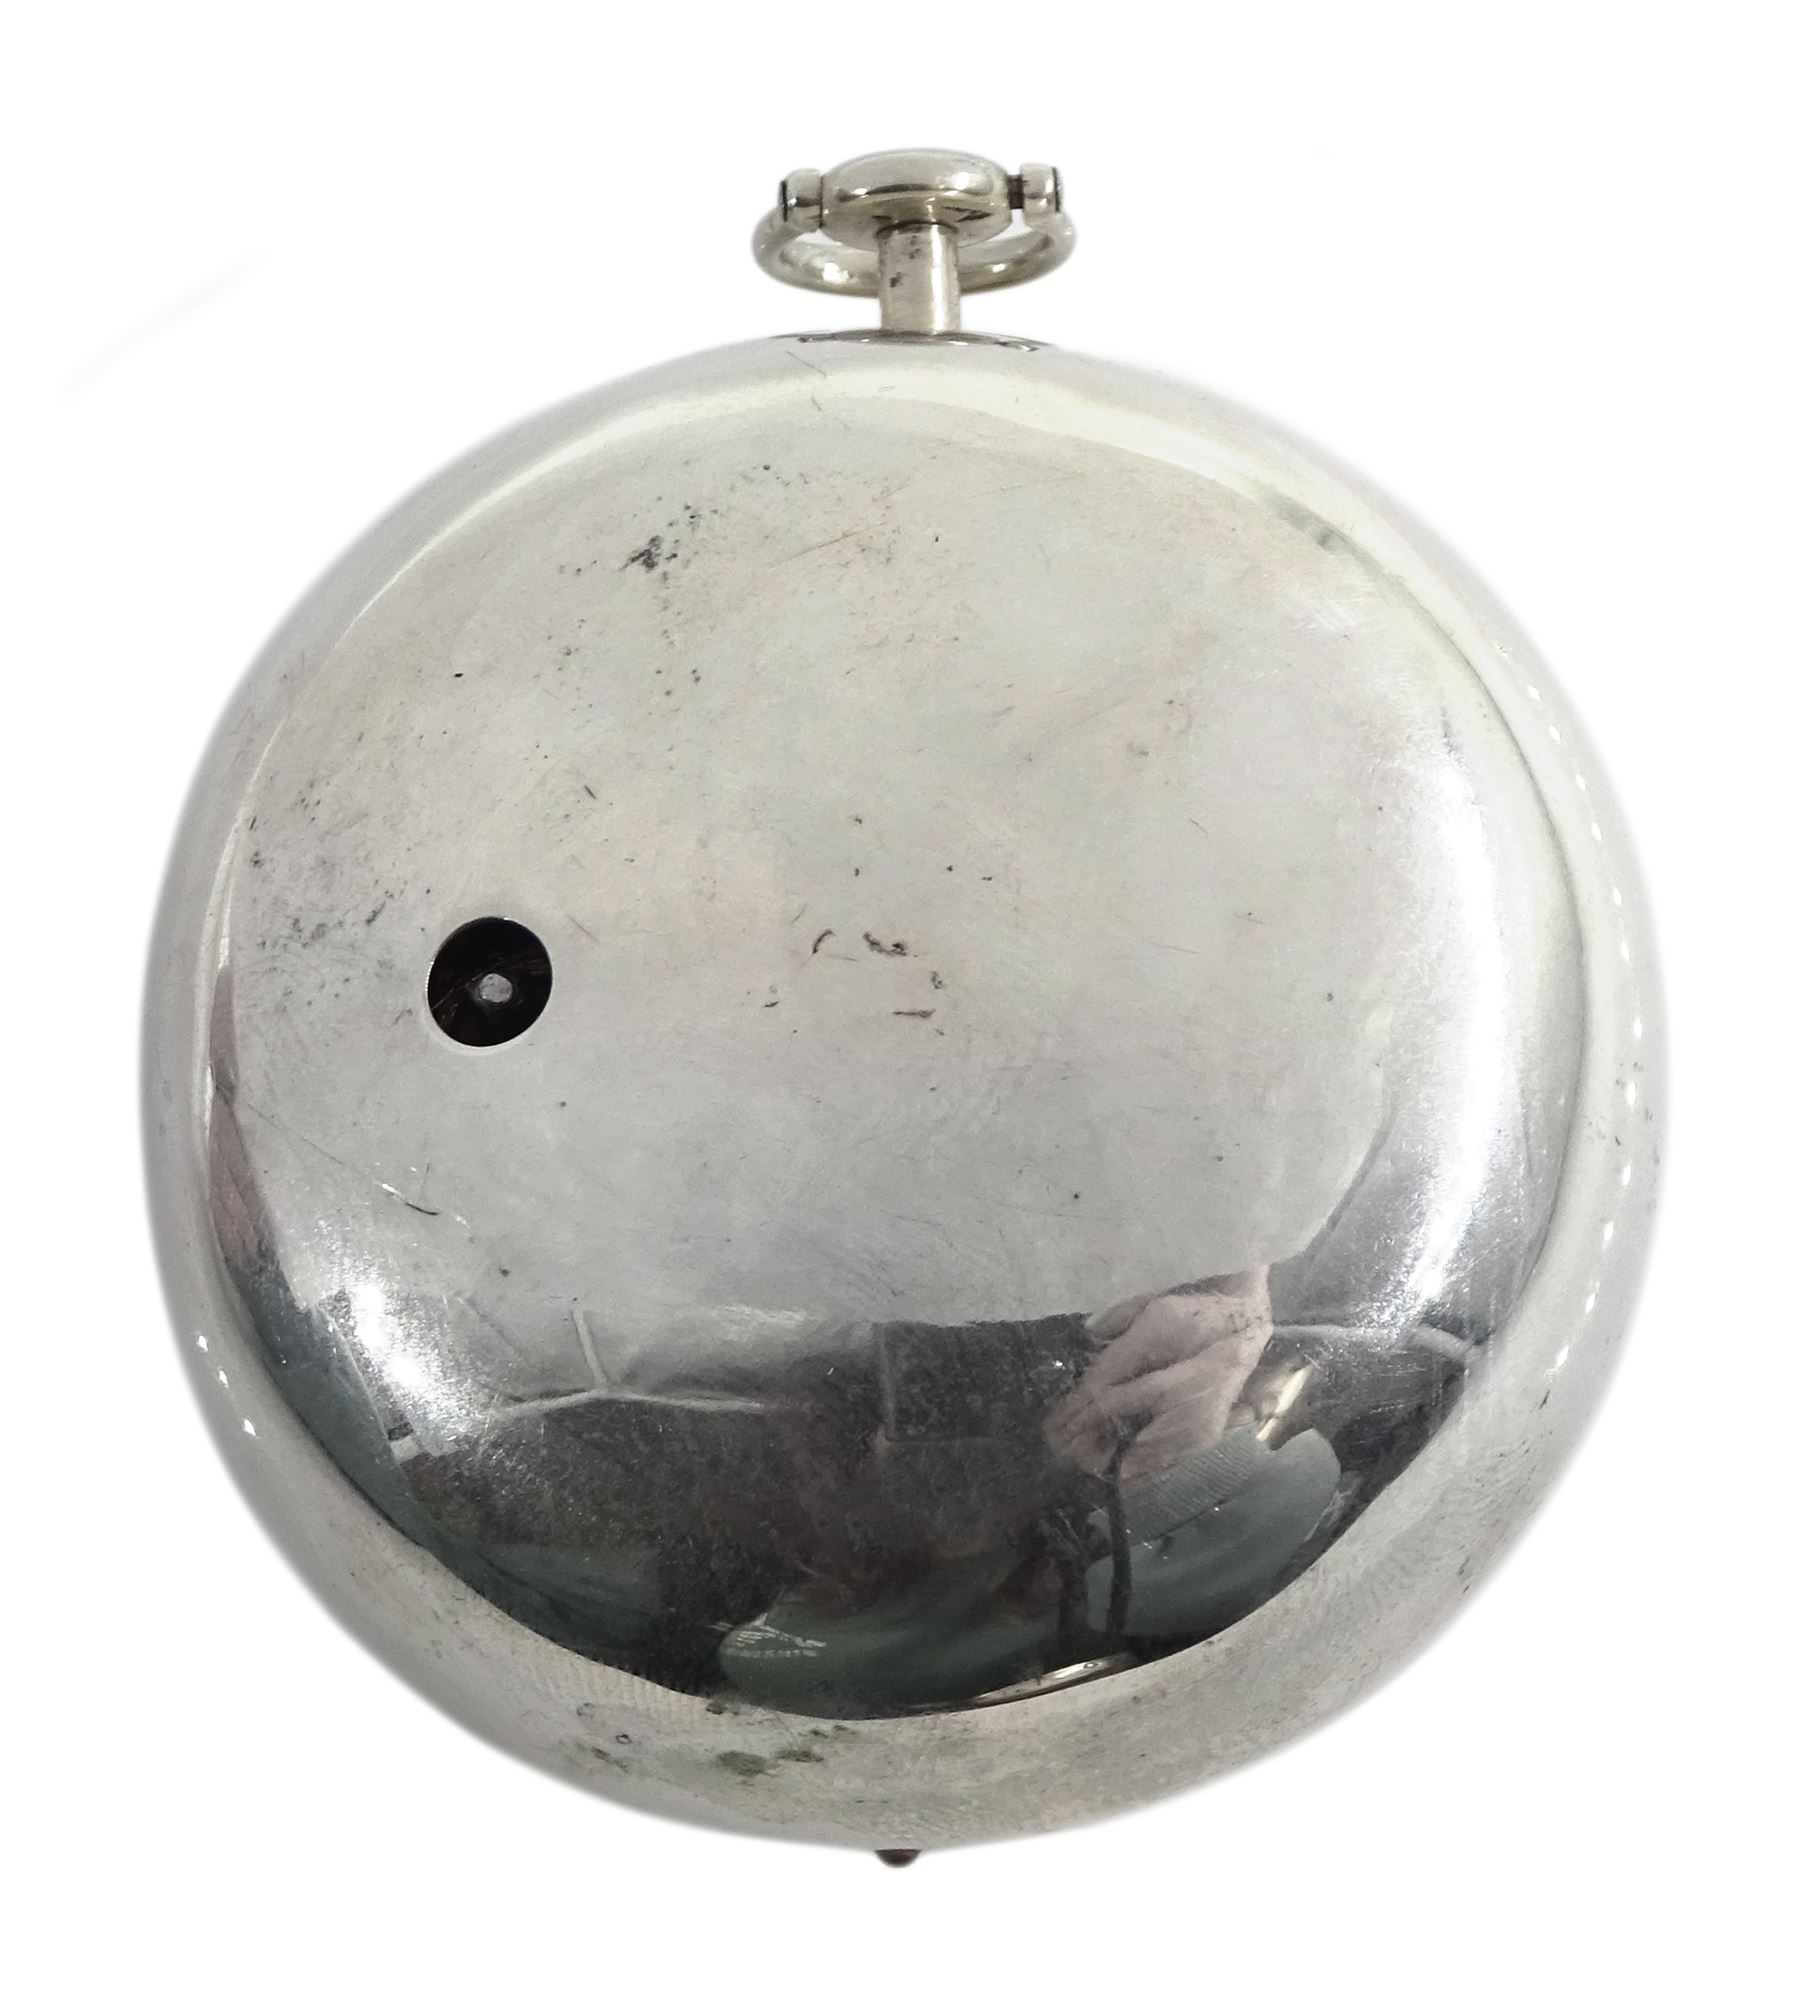 Late 17th/ early 18th century silver pair cased verge fusee pocket watch by Jonathan Garrett - Image 7 of 7